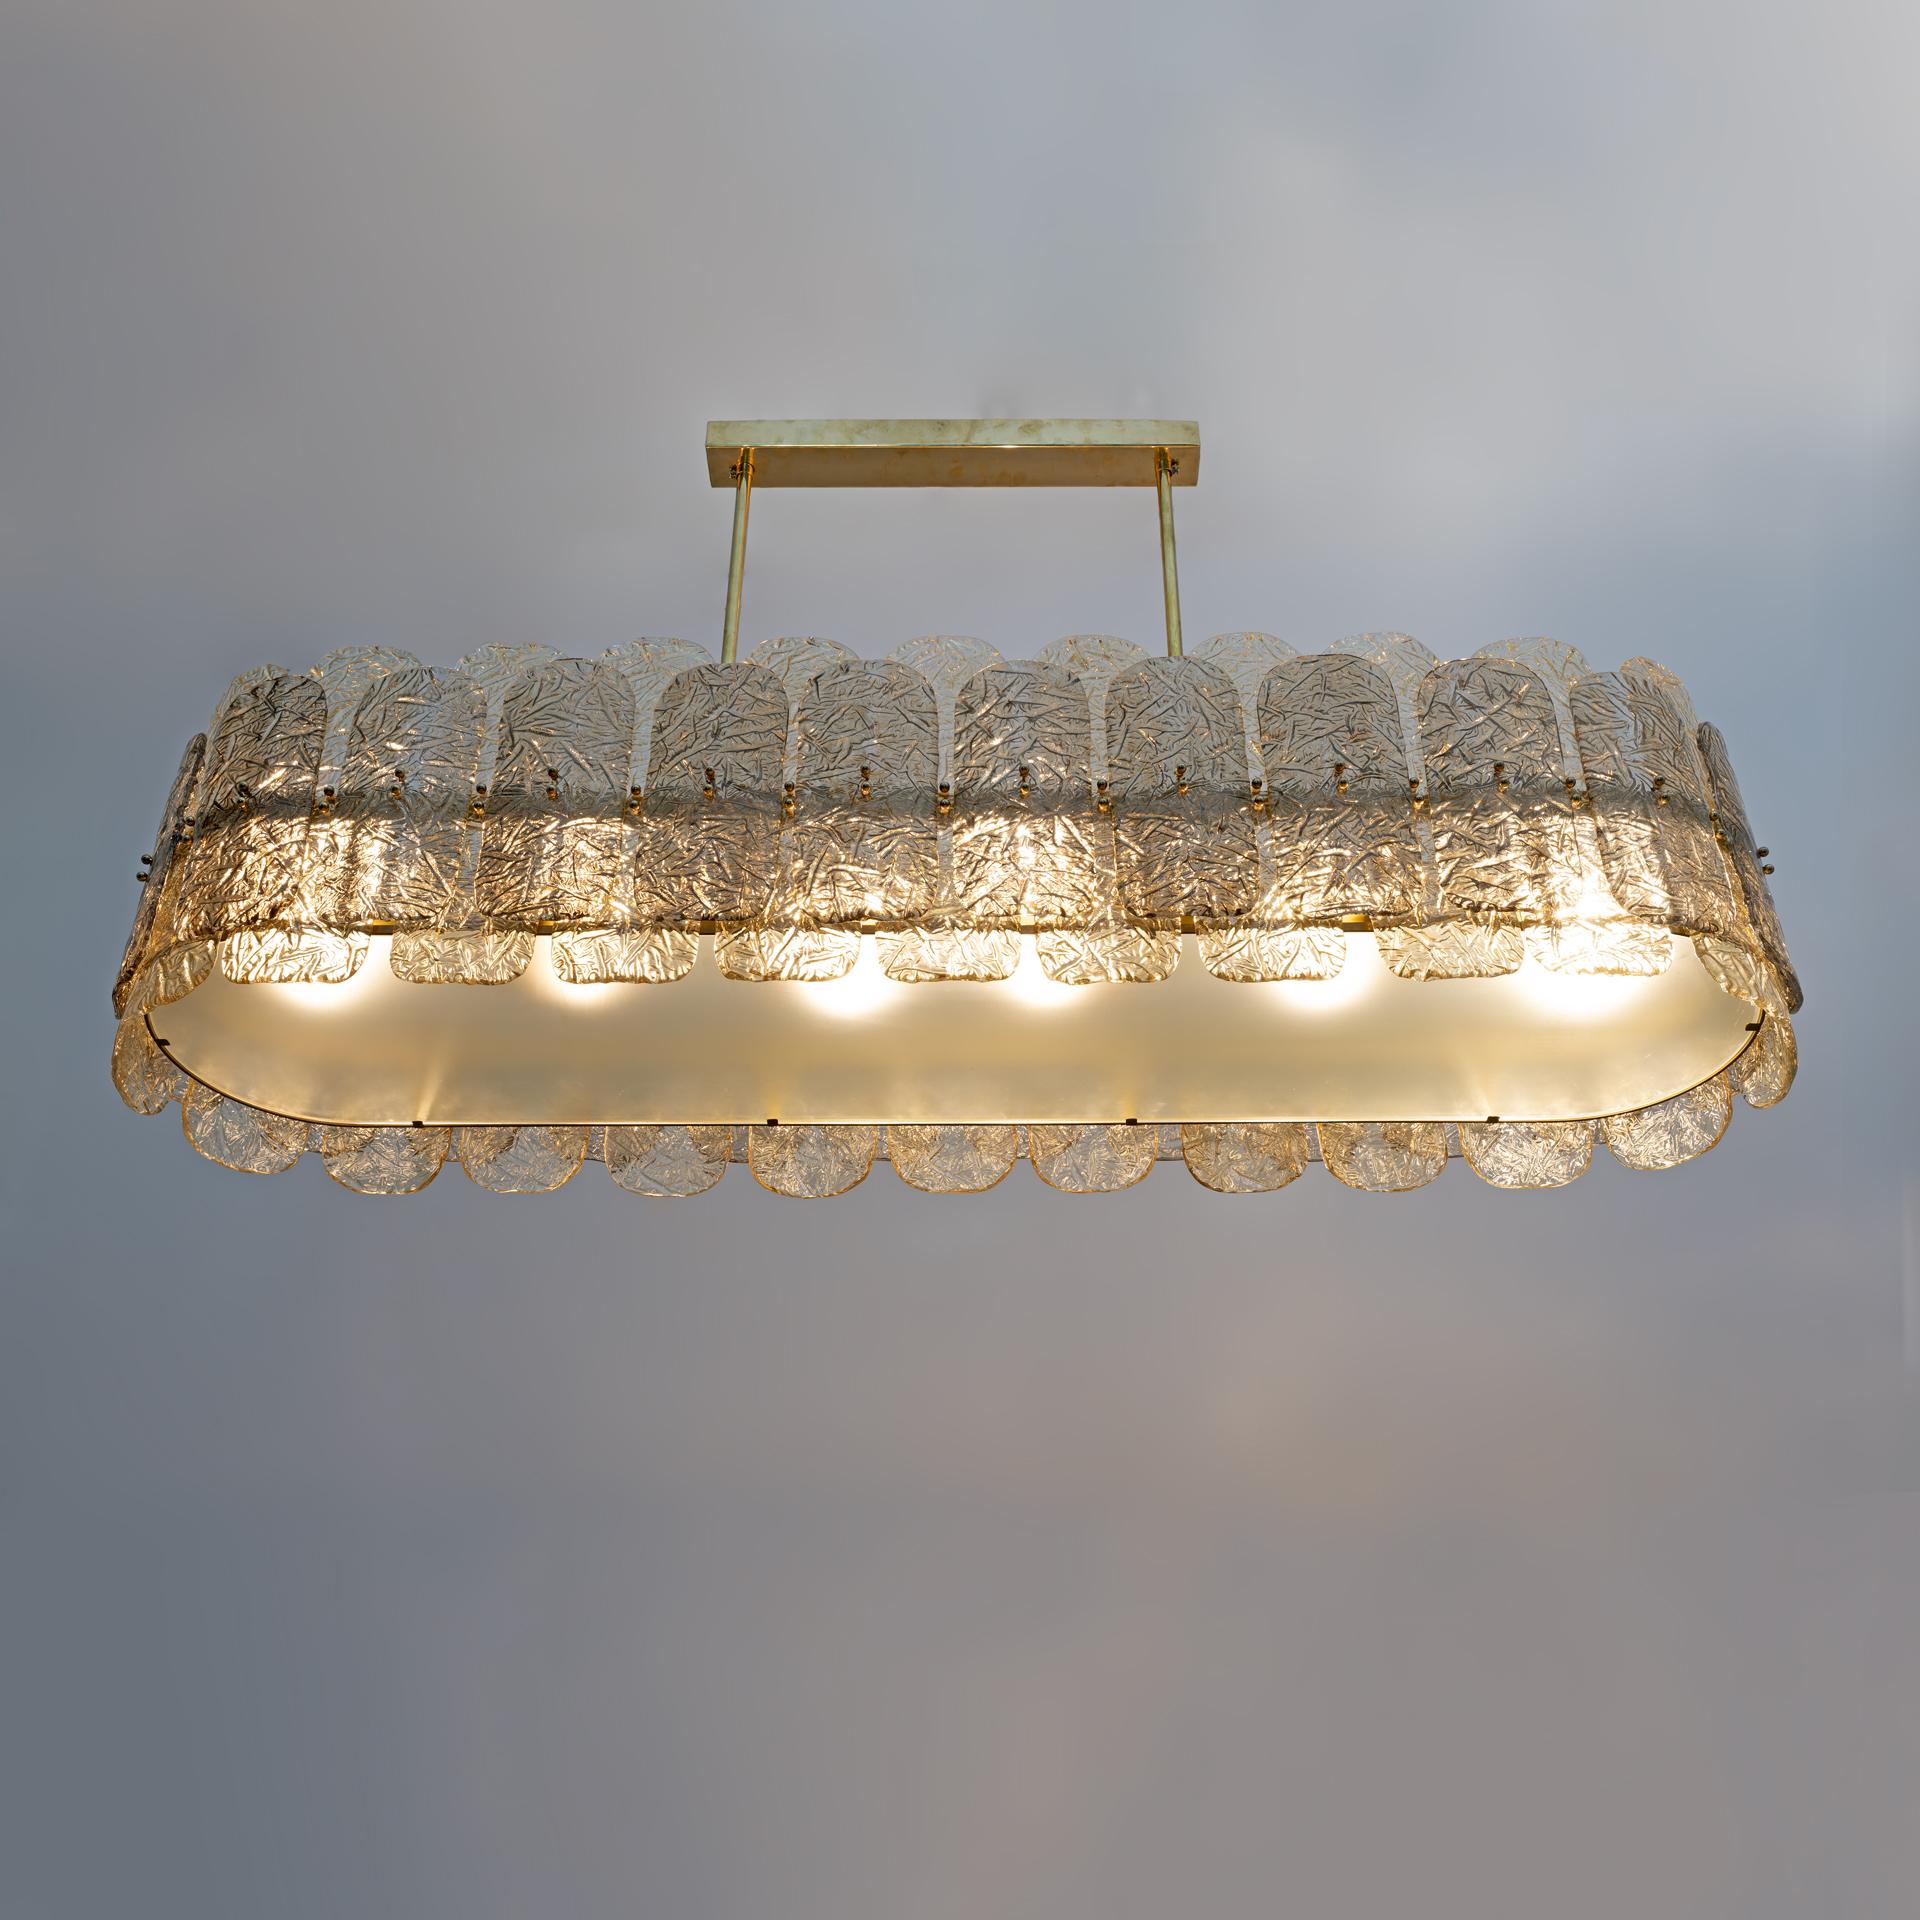 Late 20th Century Mid-century Modern Stiyle Italian Brass and Murano Glass Chandelier For Sale